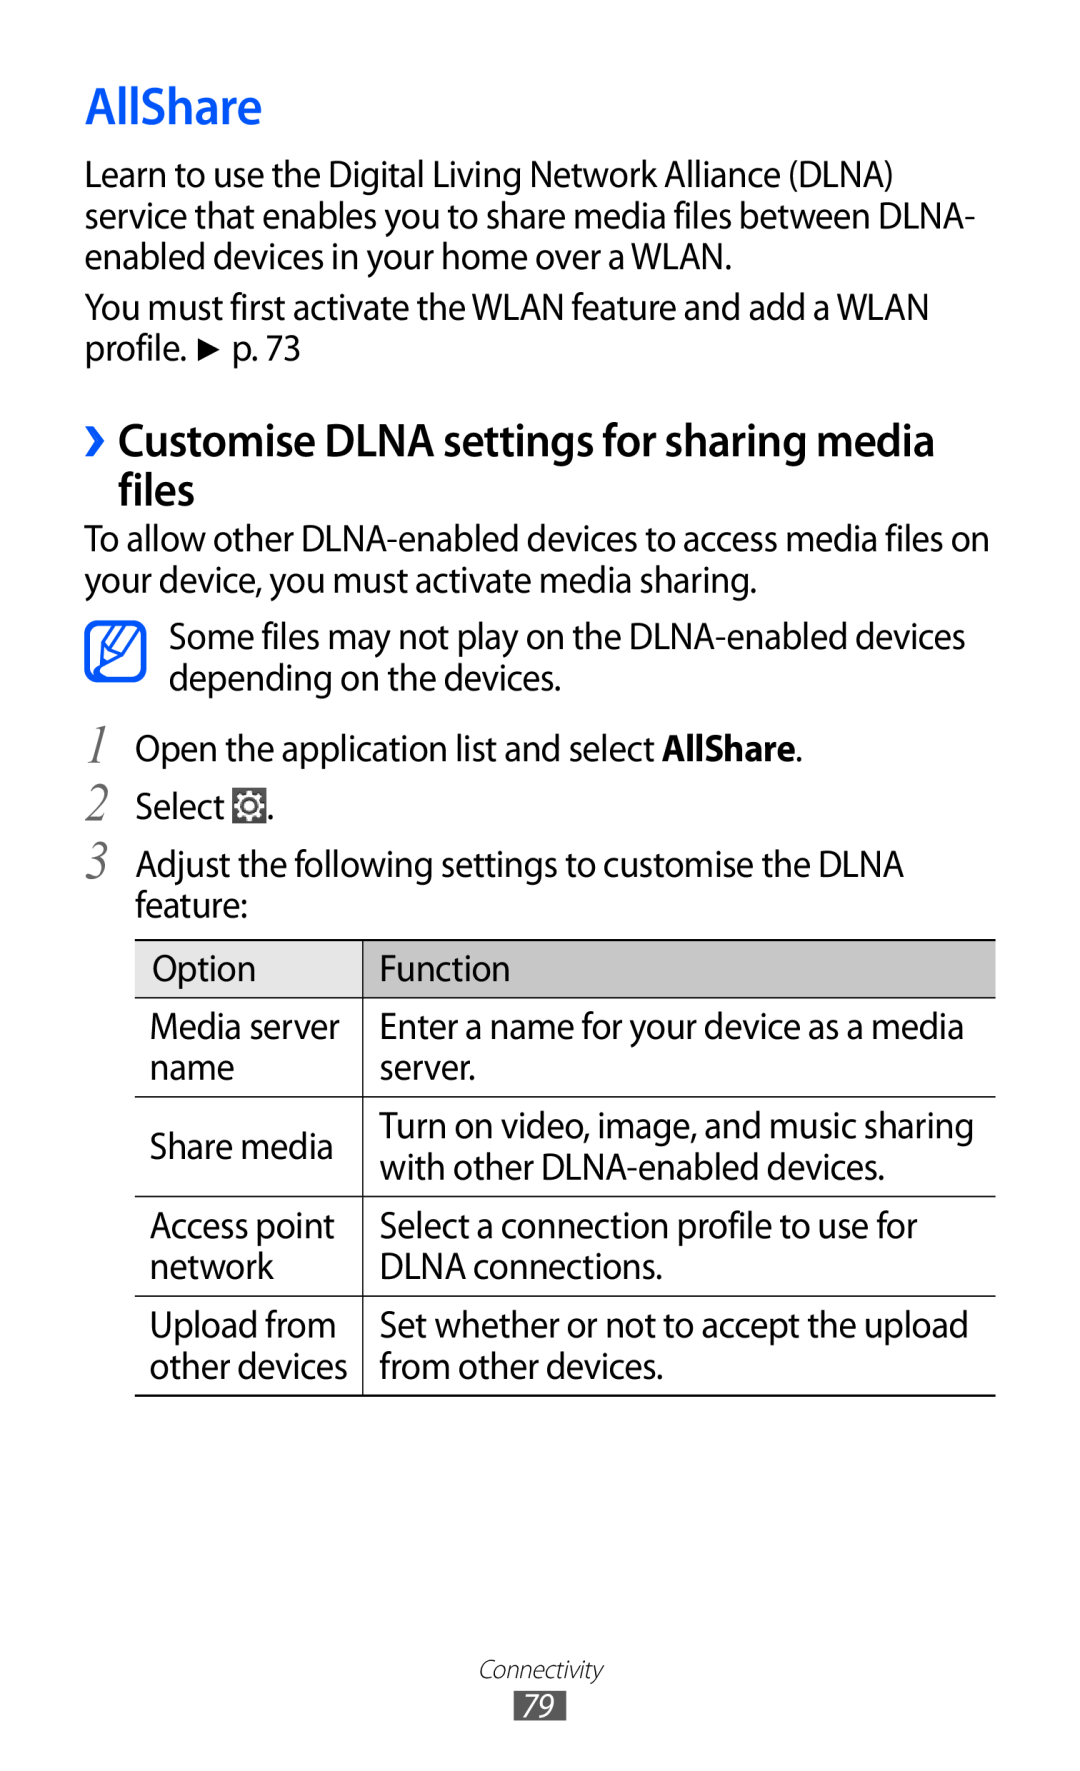 Samsung GT-P7310FKAXEZ, GT-P7310FKEXEF, GT-P7310UWEXEF manual AllShare, ››Customise DLNA settings for sharing media files 